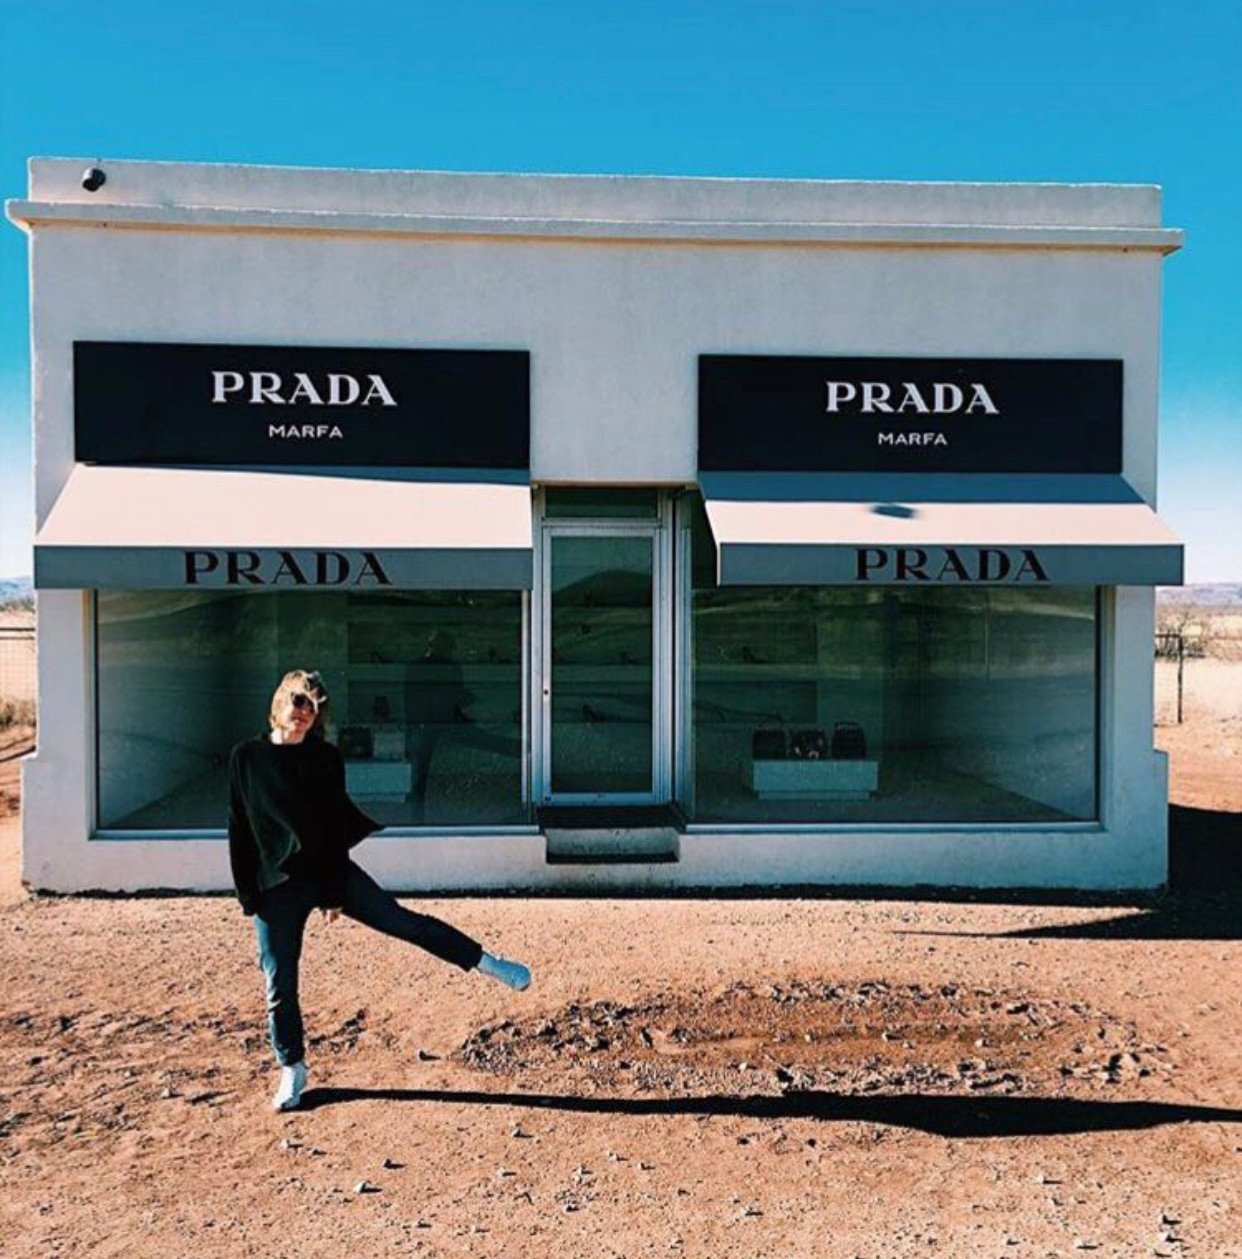 Kate Jones, founder of creative agency At Liberty and eco-friendly online gift retailer Get.Give, poses outside “Prada Marfa”, a permanent sculptural art installation in the town of Marfa, in the US state of Texas. Photo: Kate Jones